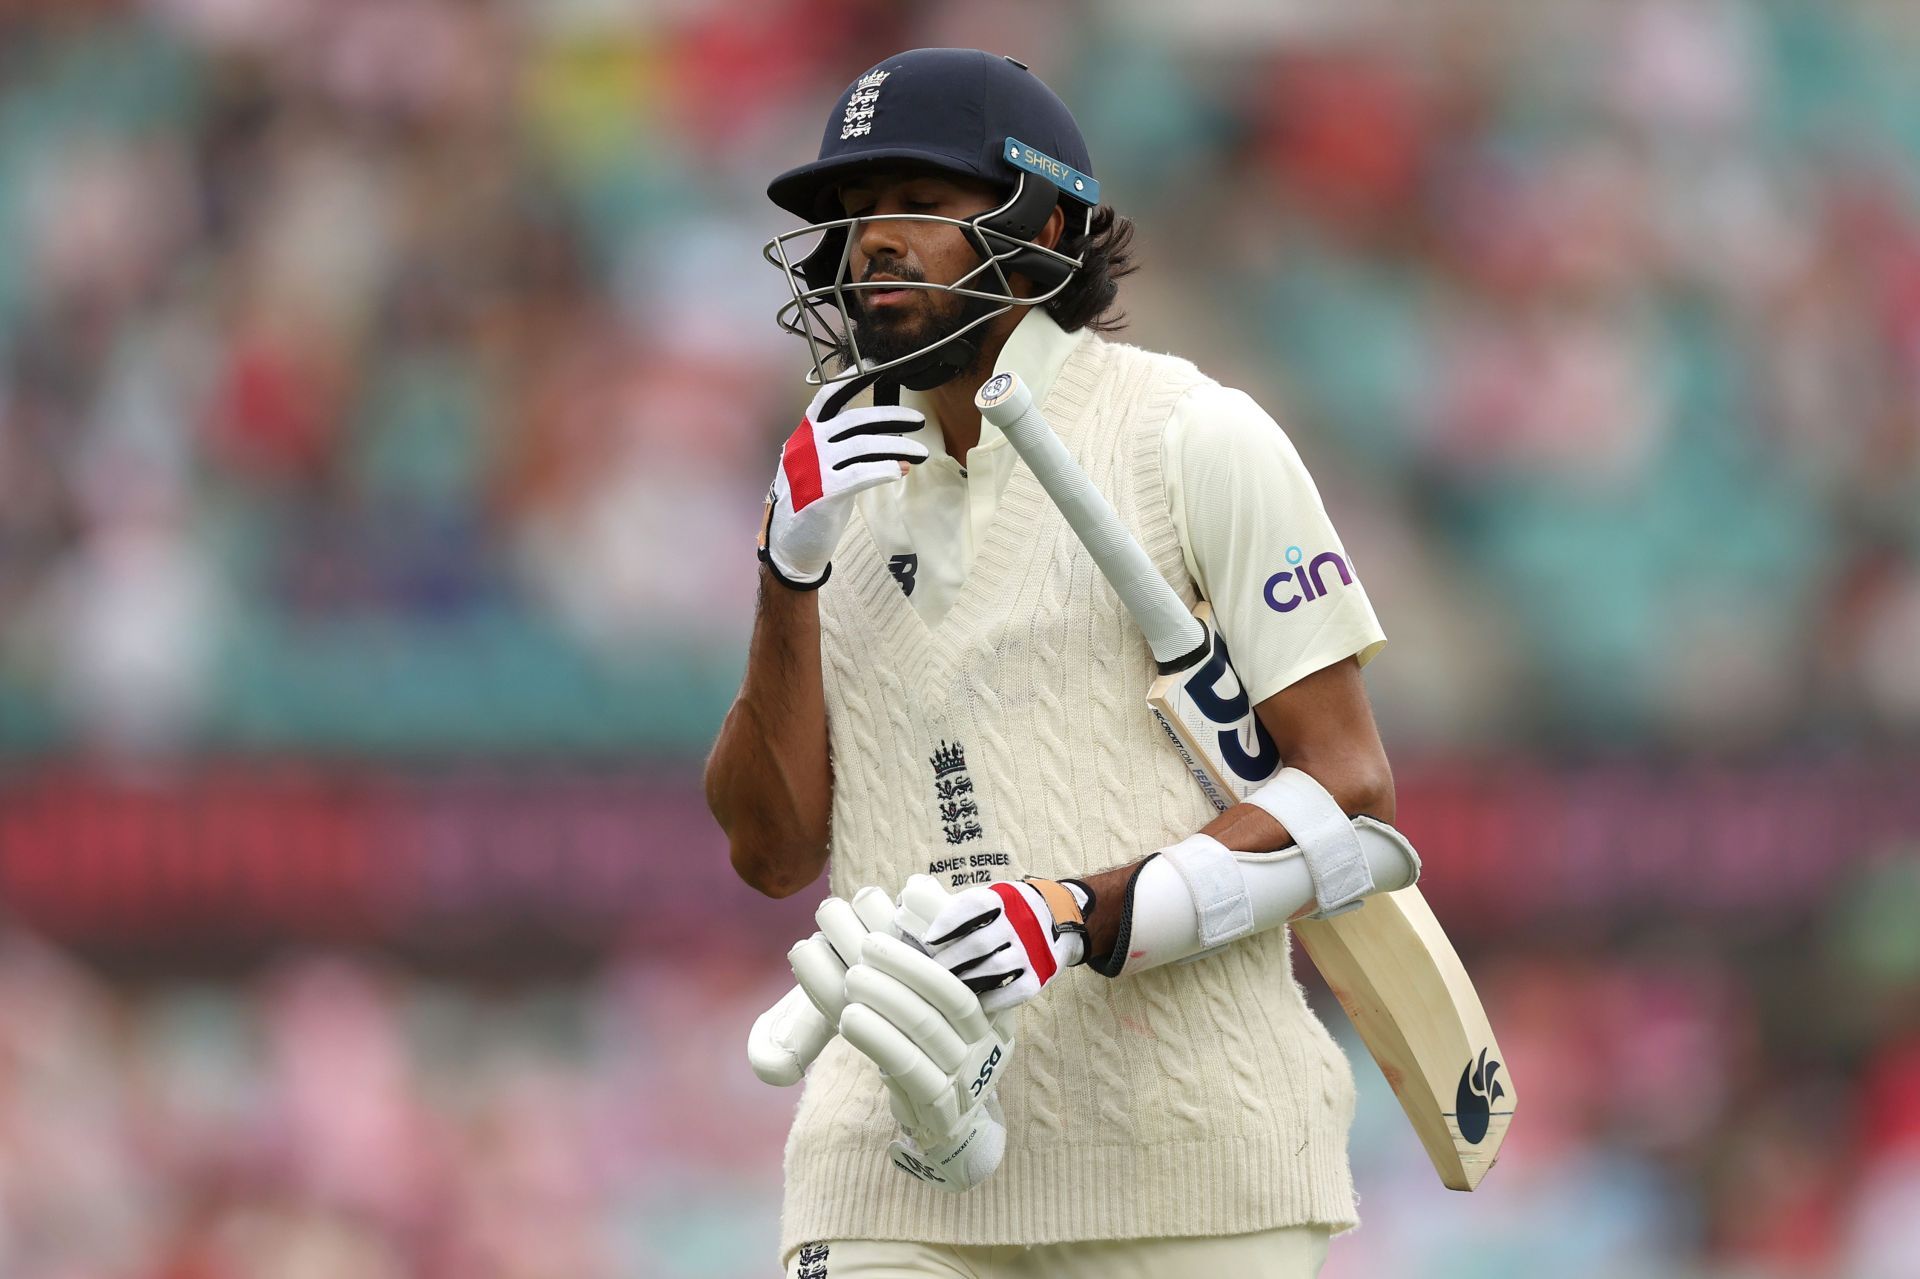 Haseeb Hameed, along with Zak Crawley formed what was England&#039;s 4th different opening combination of 2021 during the 3rd Ashes Test at the MCG.